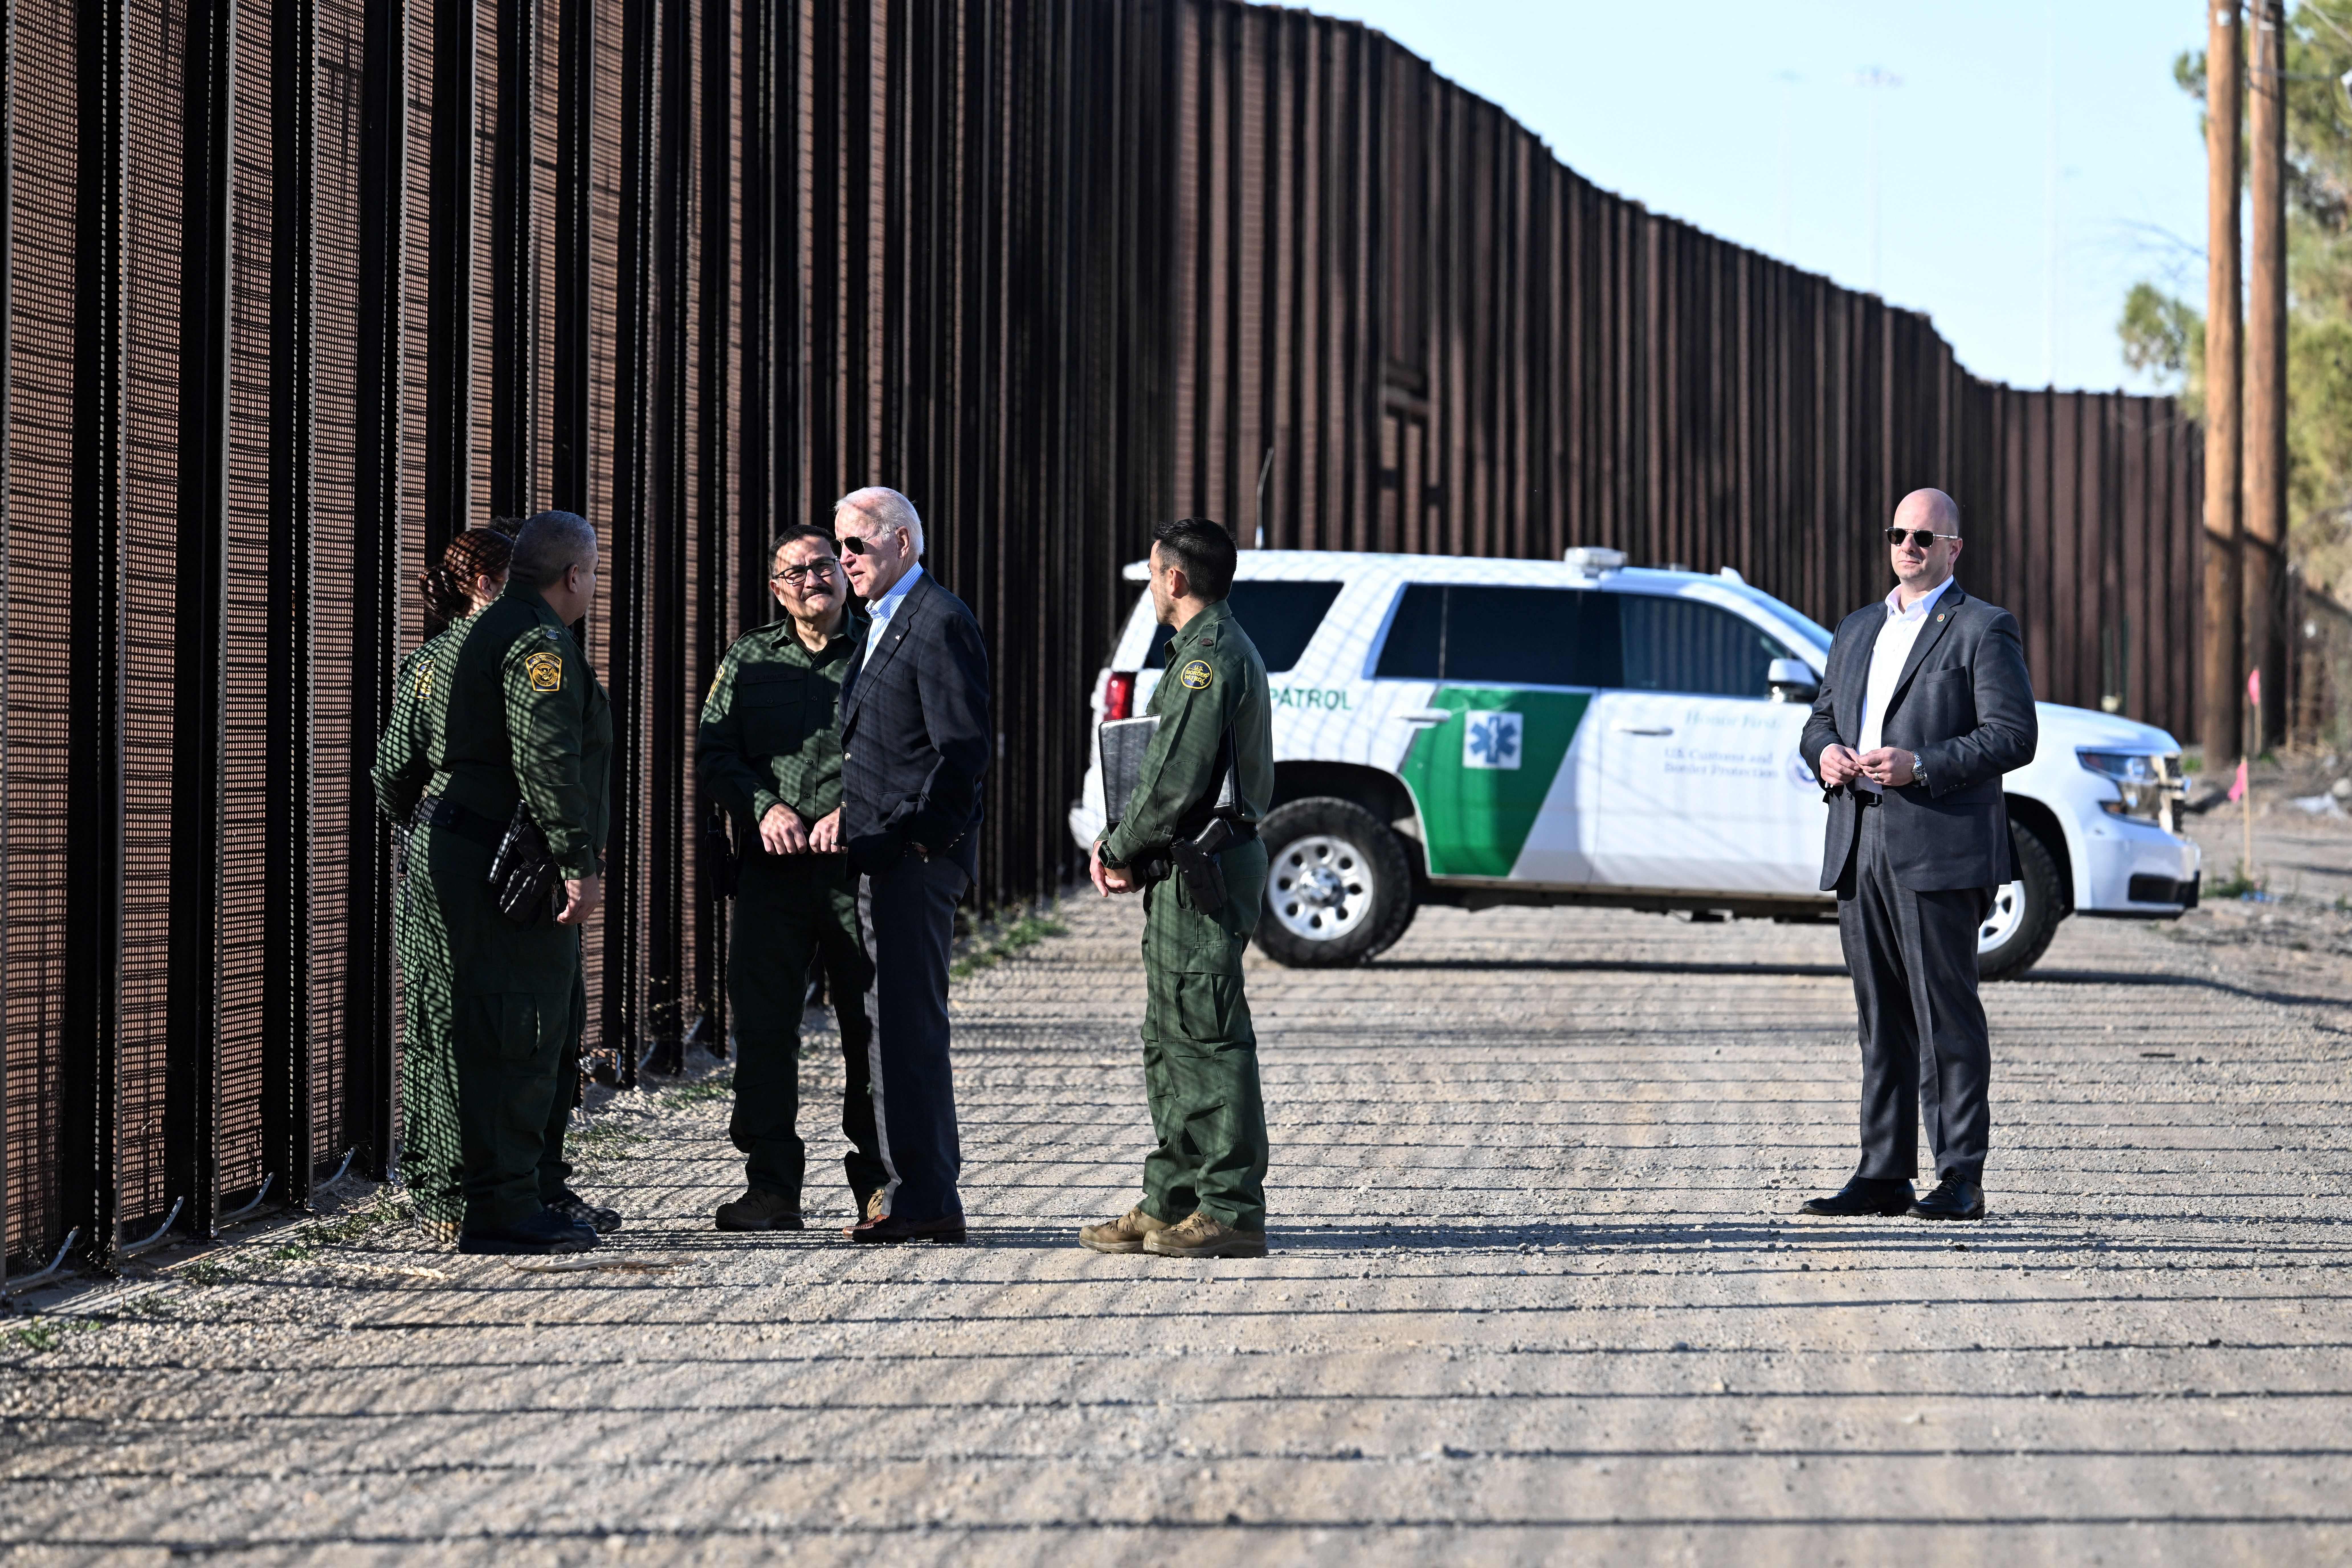 US President Joe Biden speaks with members of the US Border Patrol in front of the US-Mexico border fence in El Paso, Texas, on January 8, 2023. - Biden went to t e US-Mexico border on Sunday for the first time since taking office, visiting an El Paso, Texas entry point at the center of debates over illegal immigration and smuggling. (Photo by Jim WATSON / AFP) (Photo by JIM WATSON/AFP via Getty Images)